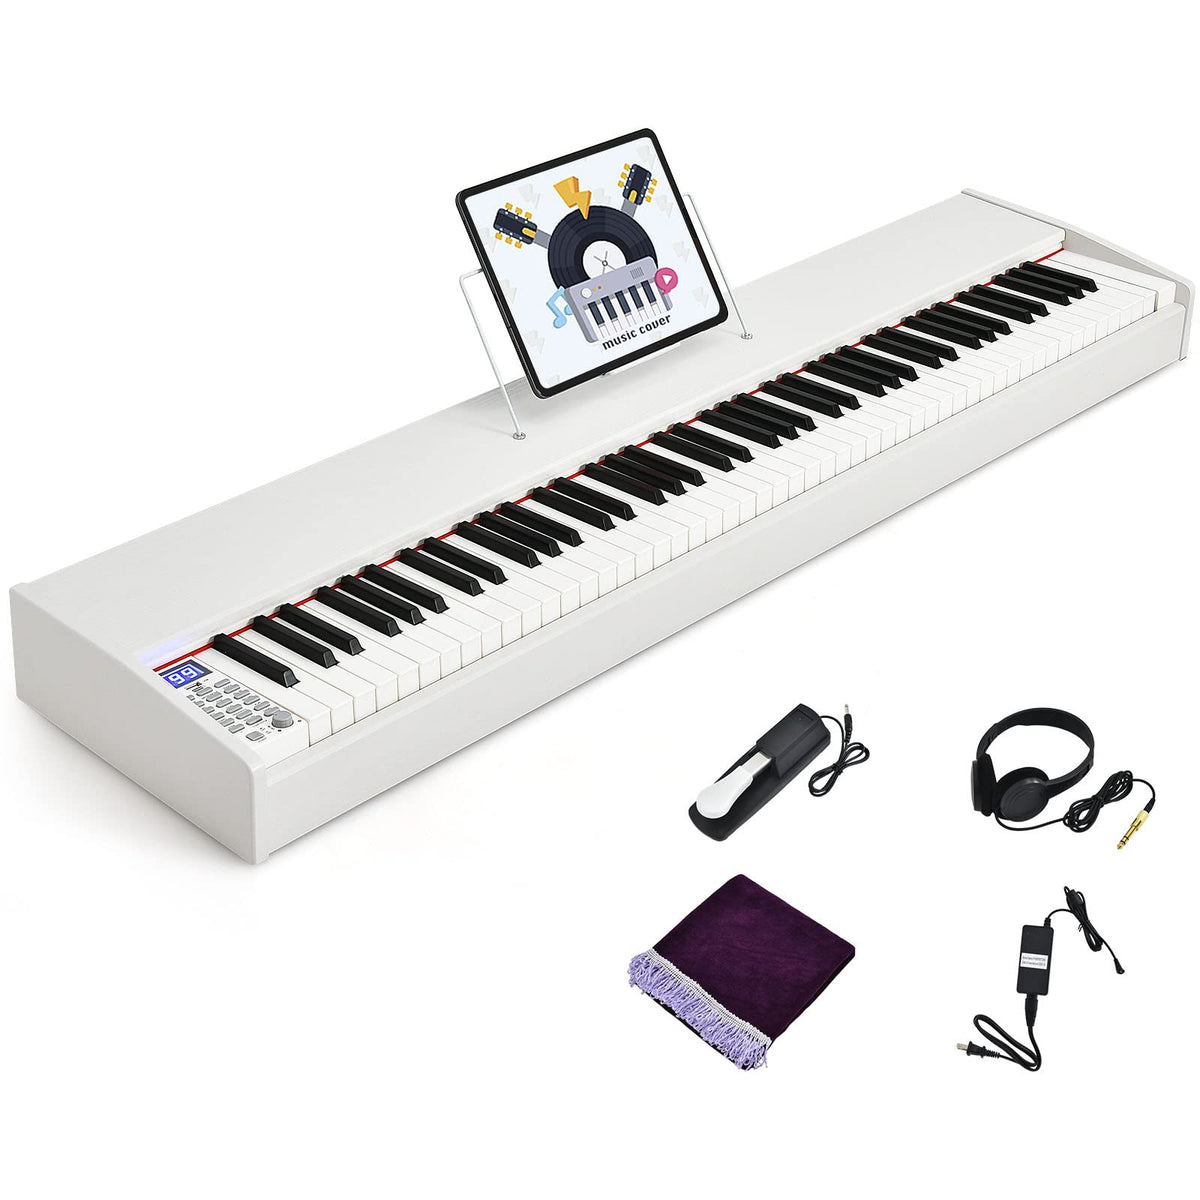 88-Key Digital Piano Full Size Weighted Keyboard with Sustain Pedal, Portable Electric Piano for Beginner Adults Practice